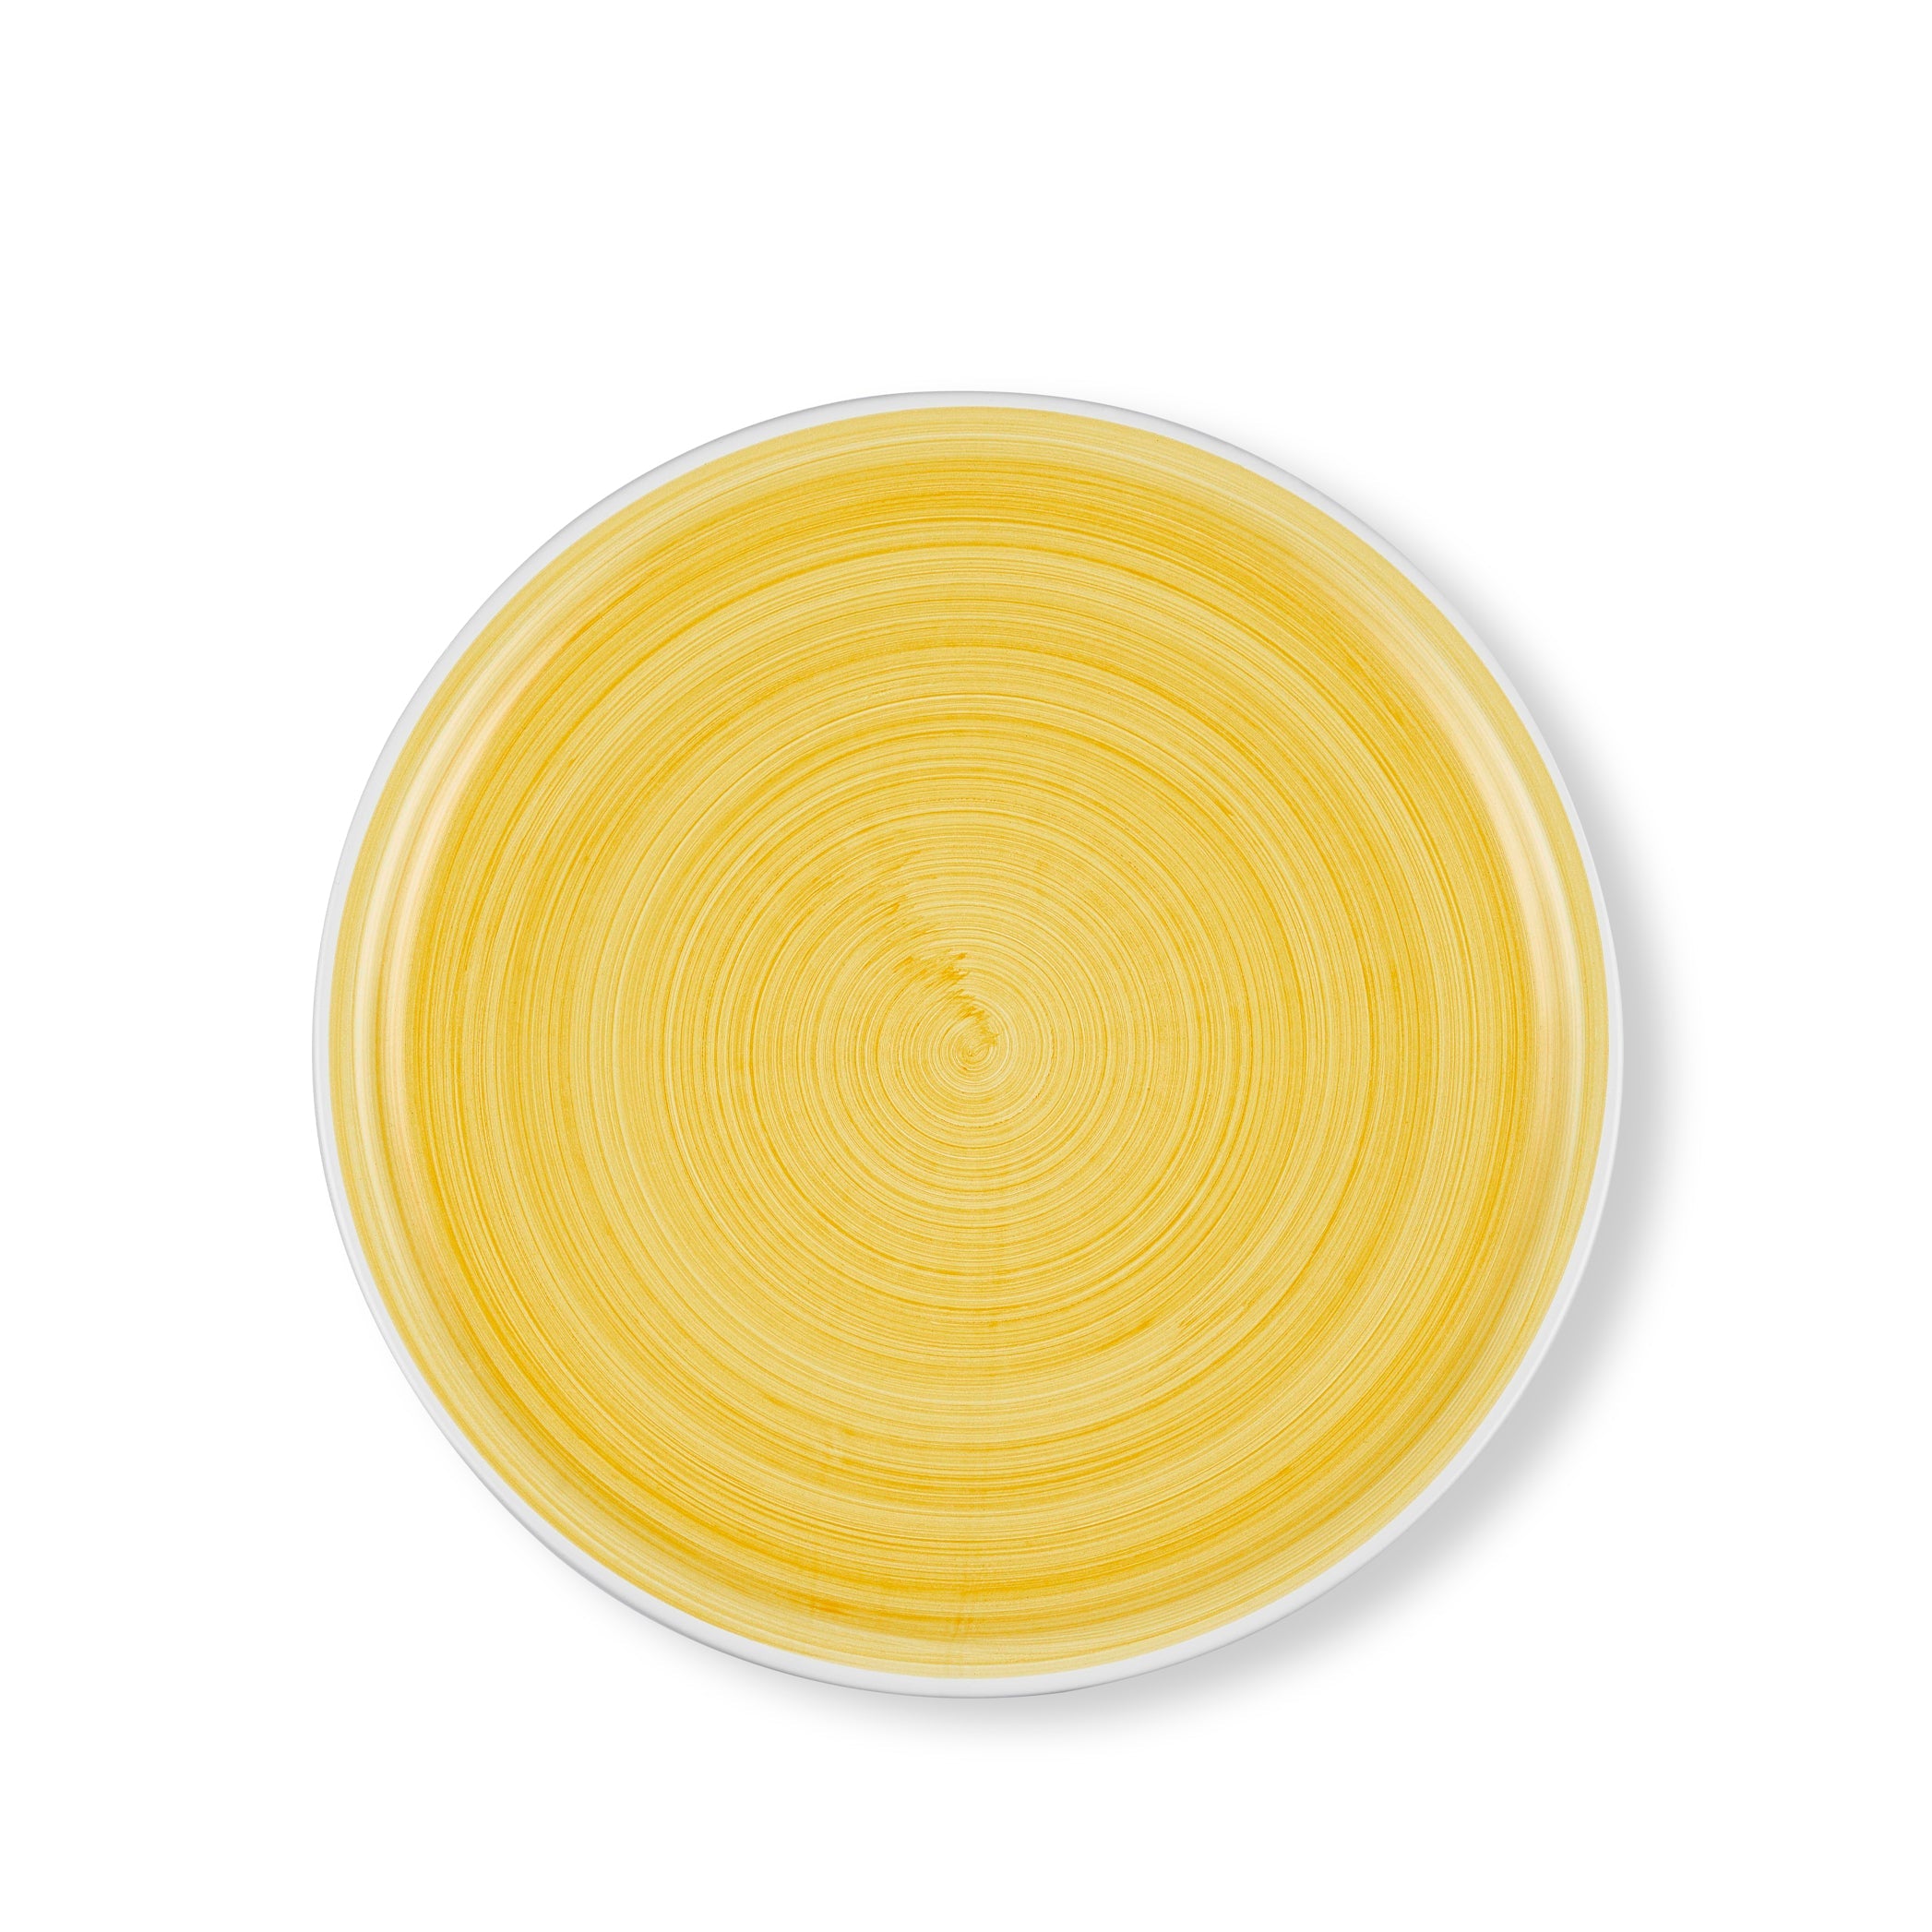 S&B 'Brushed' Ceramic Dinner Plate in Yellow, 30cm